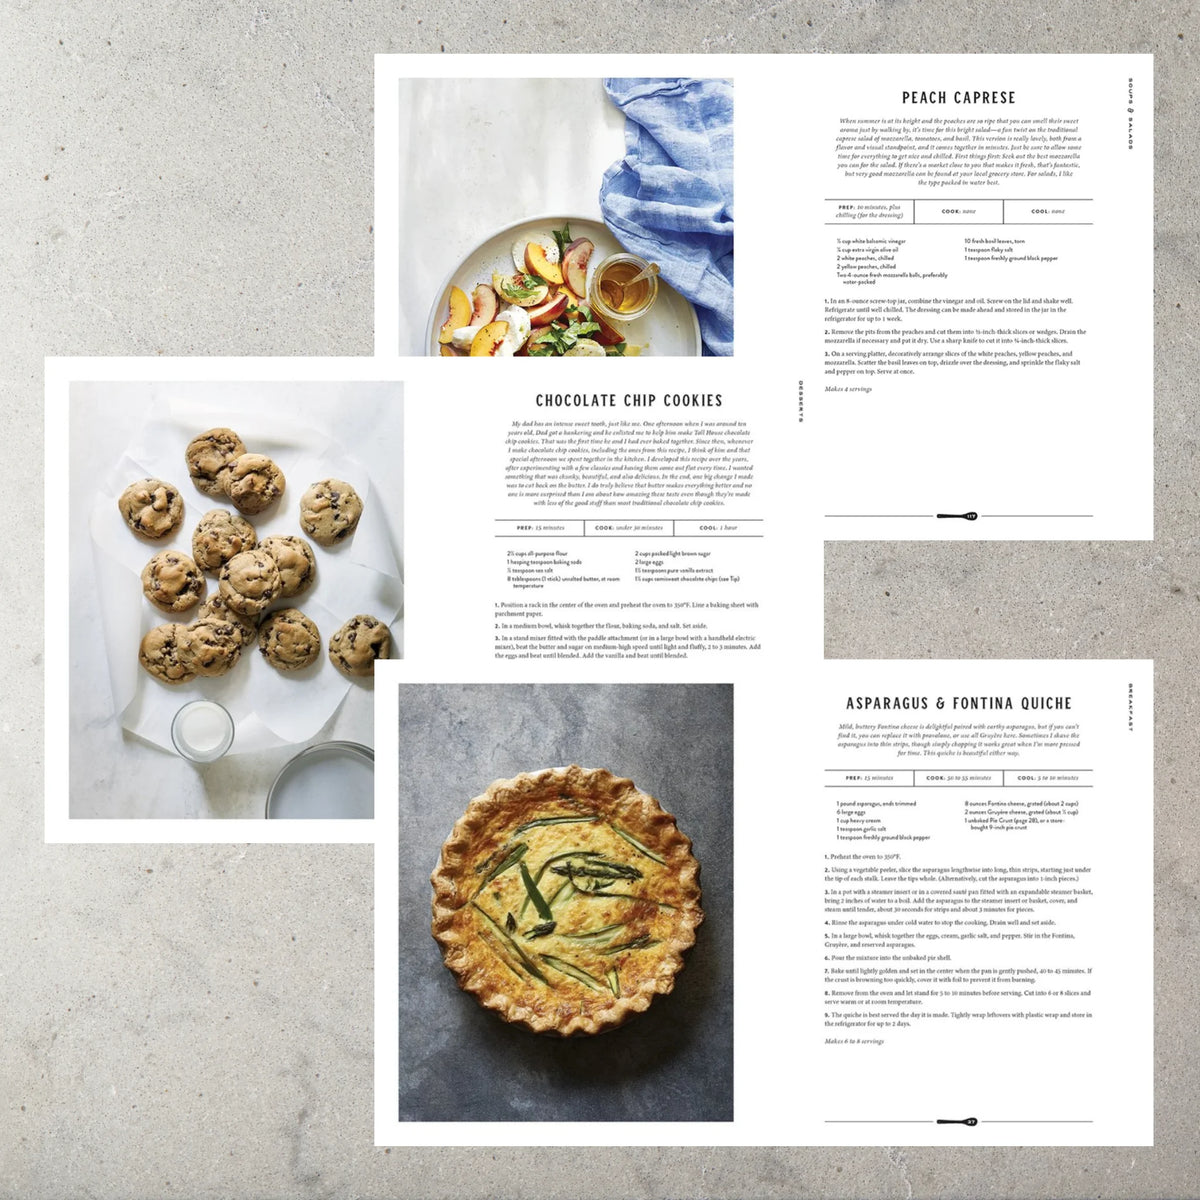 Magnolia Table Cookbook with hard cover by Joanna Gaines. Image shows examples Peach Caprese, Chocolate Chip Cookies and Asparagus & Fontina Quiche.